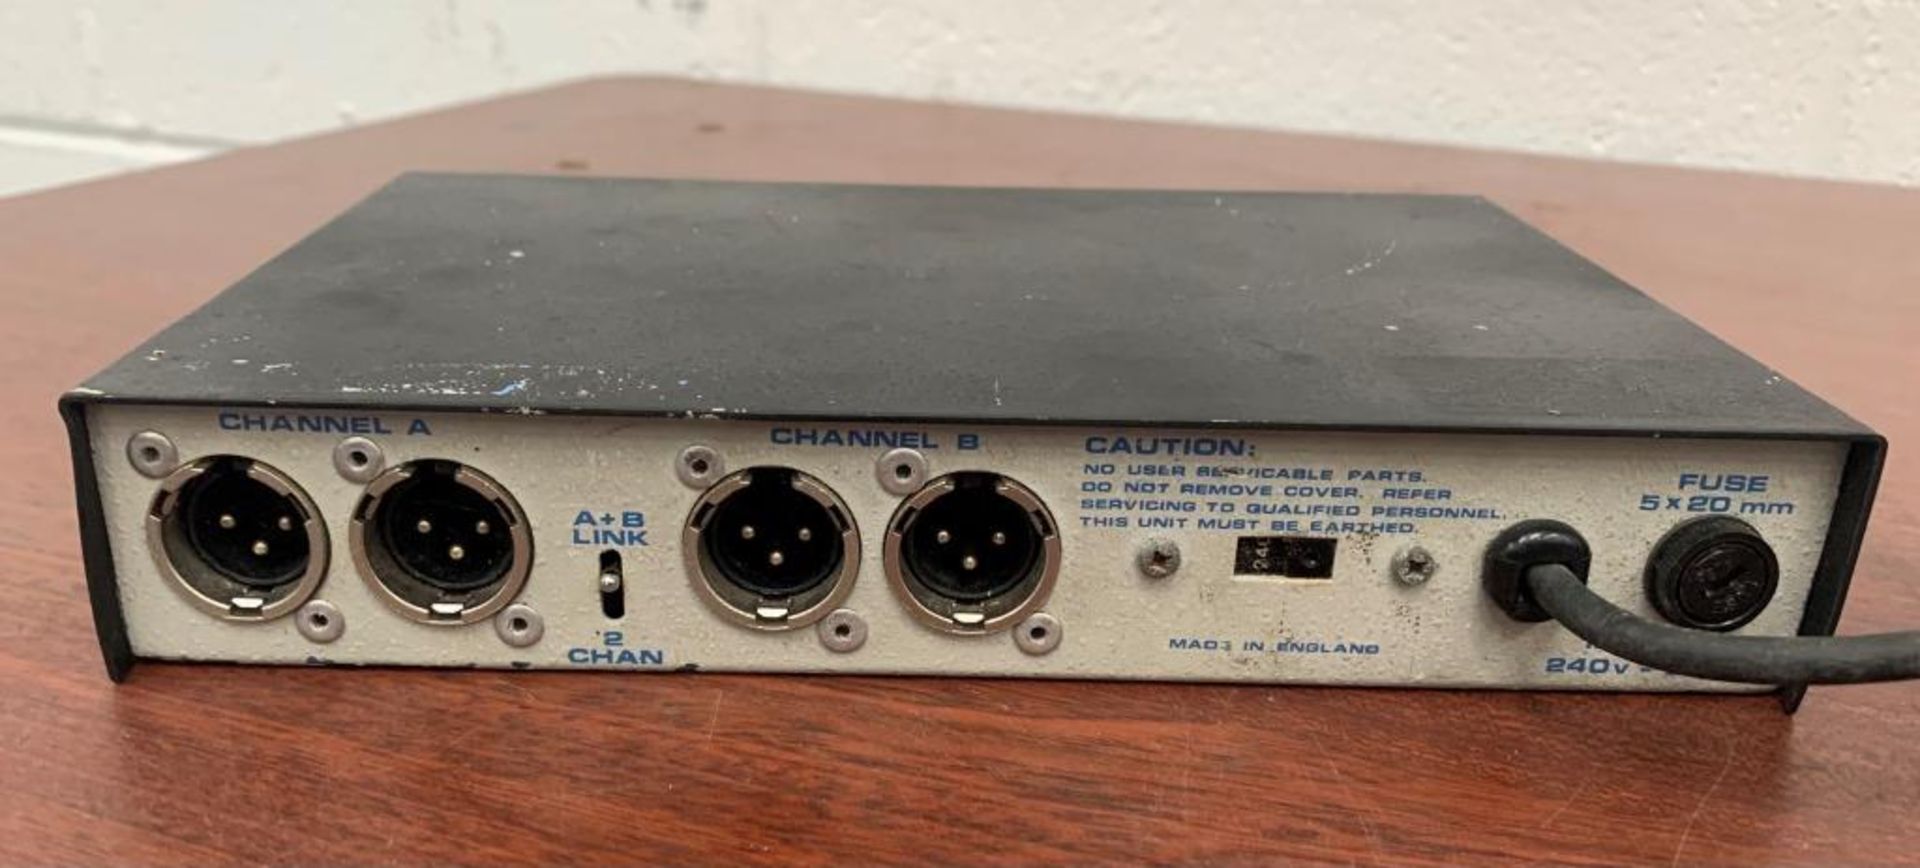 Metro Audio 2 Channel CP52 Power Supply - Image 2 of 3